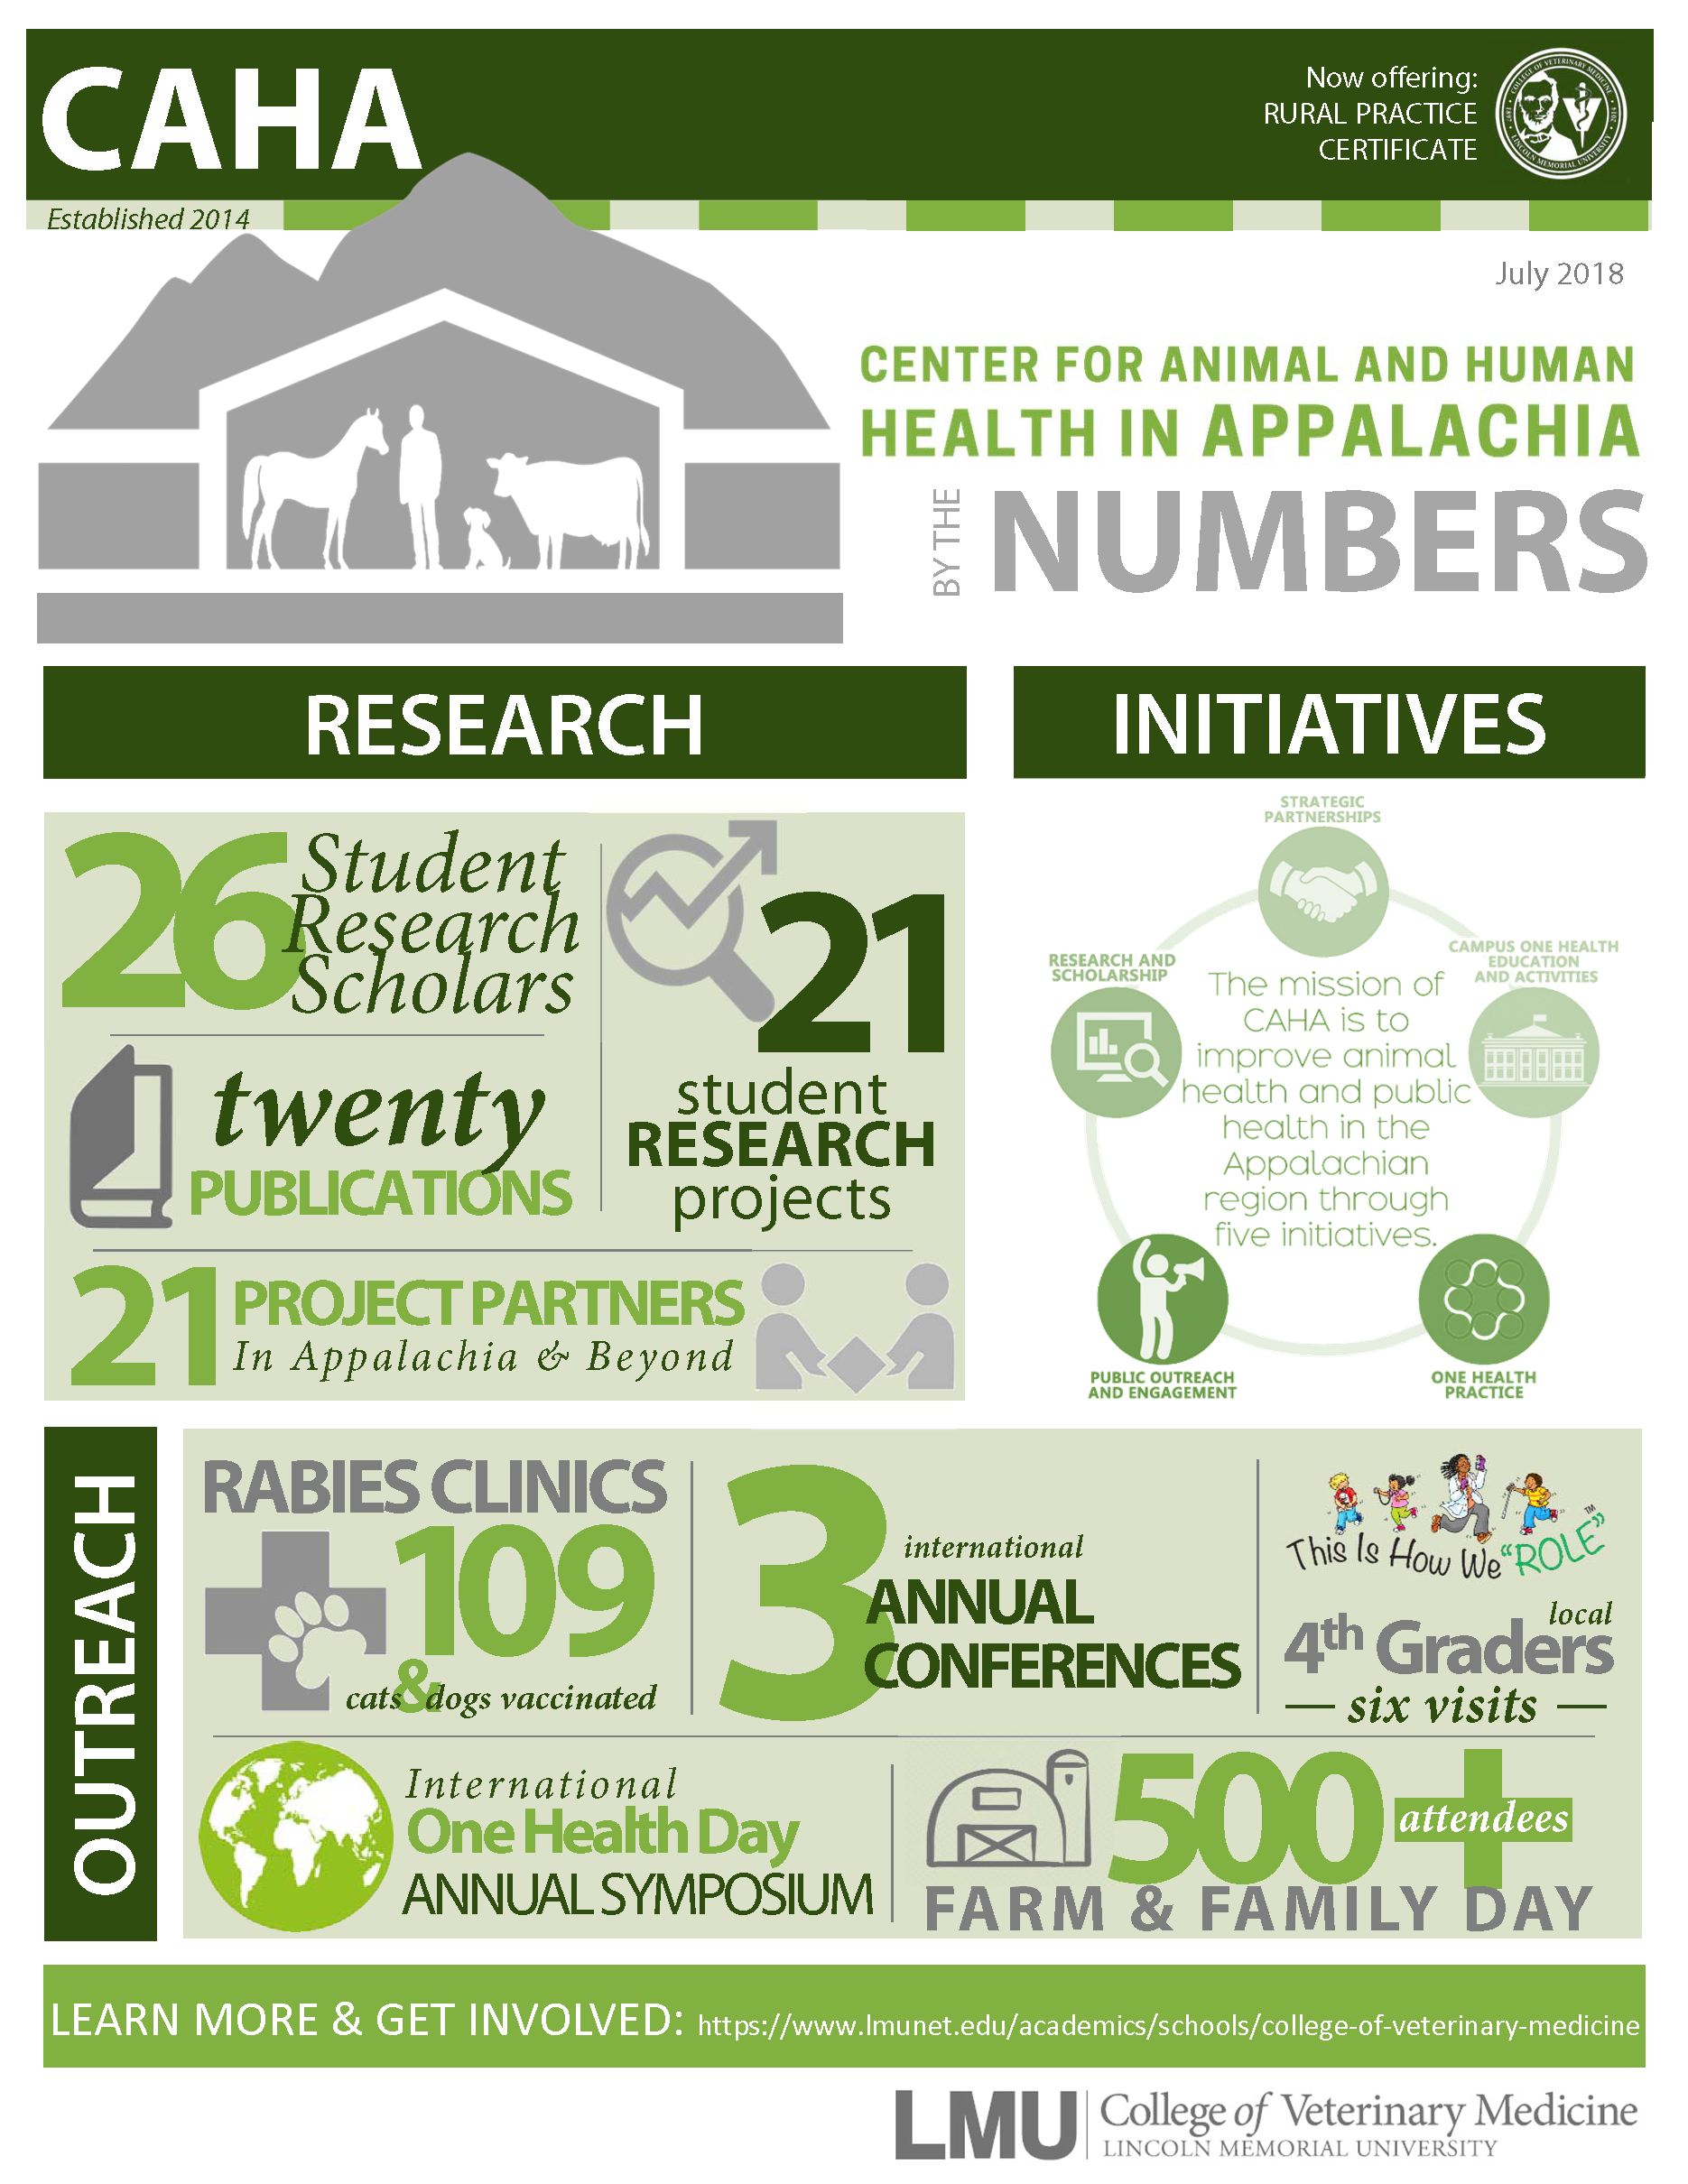 CAHA By the numbers